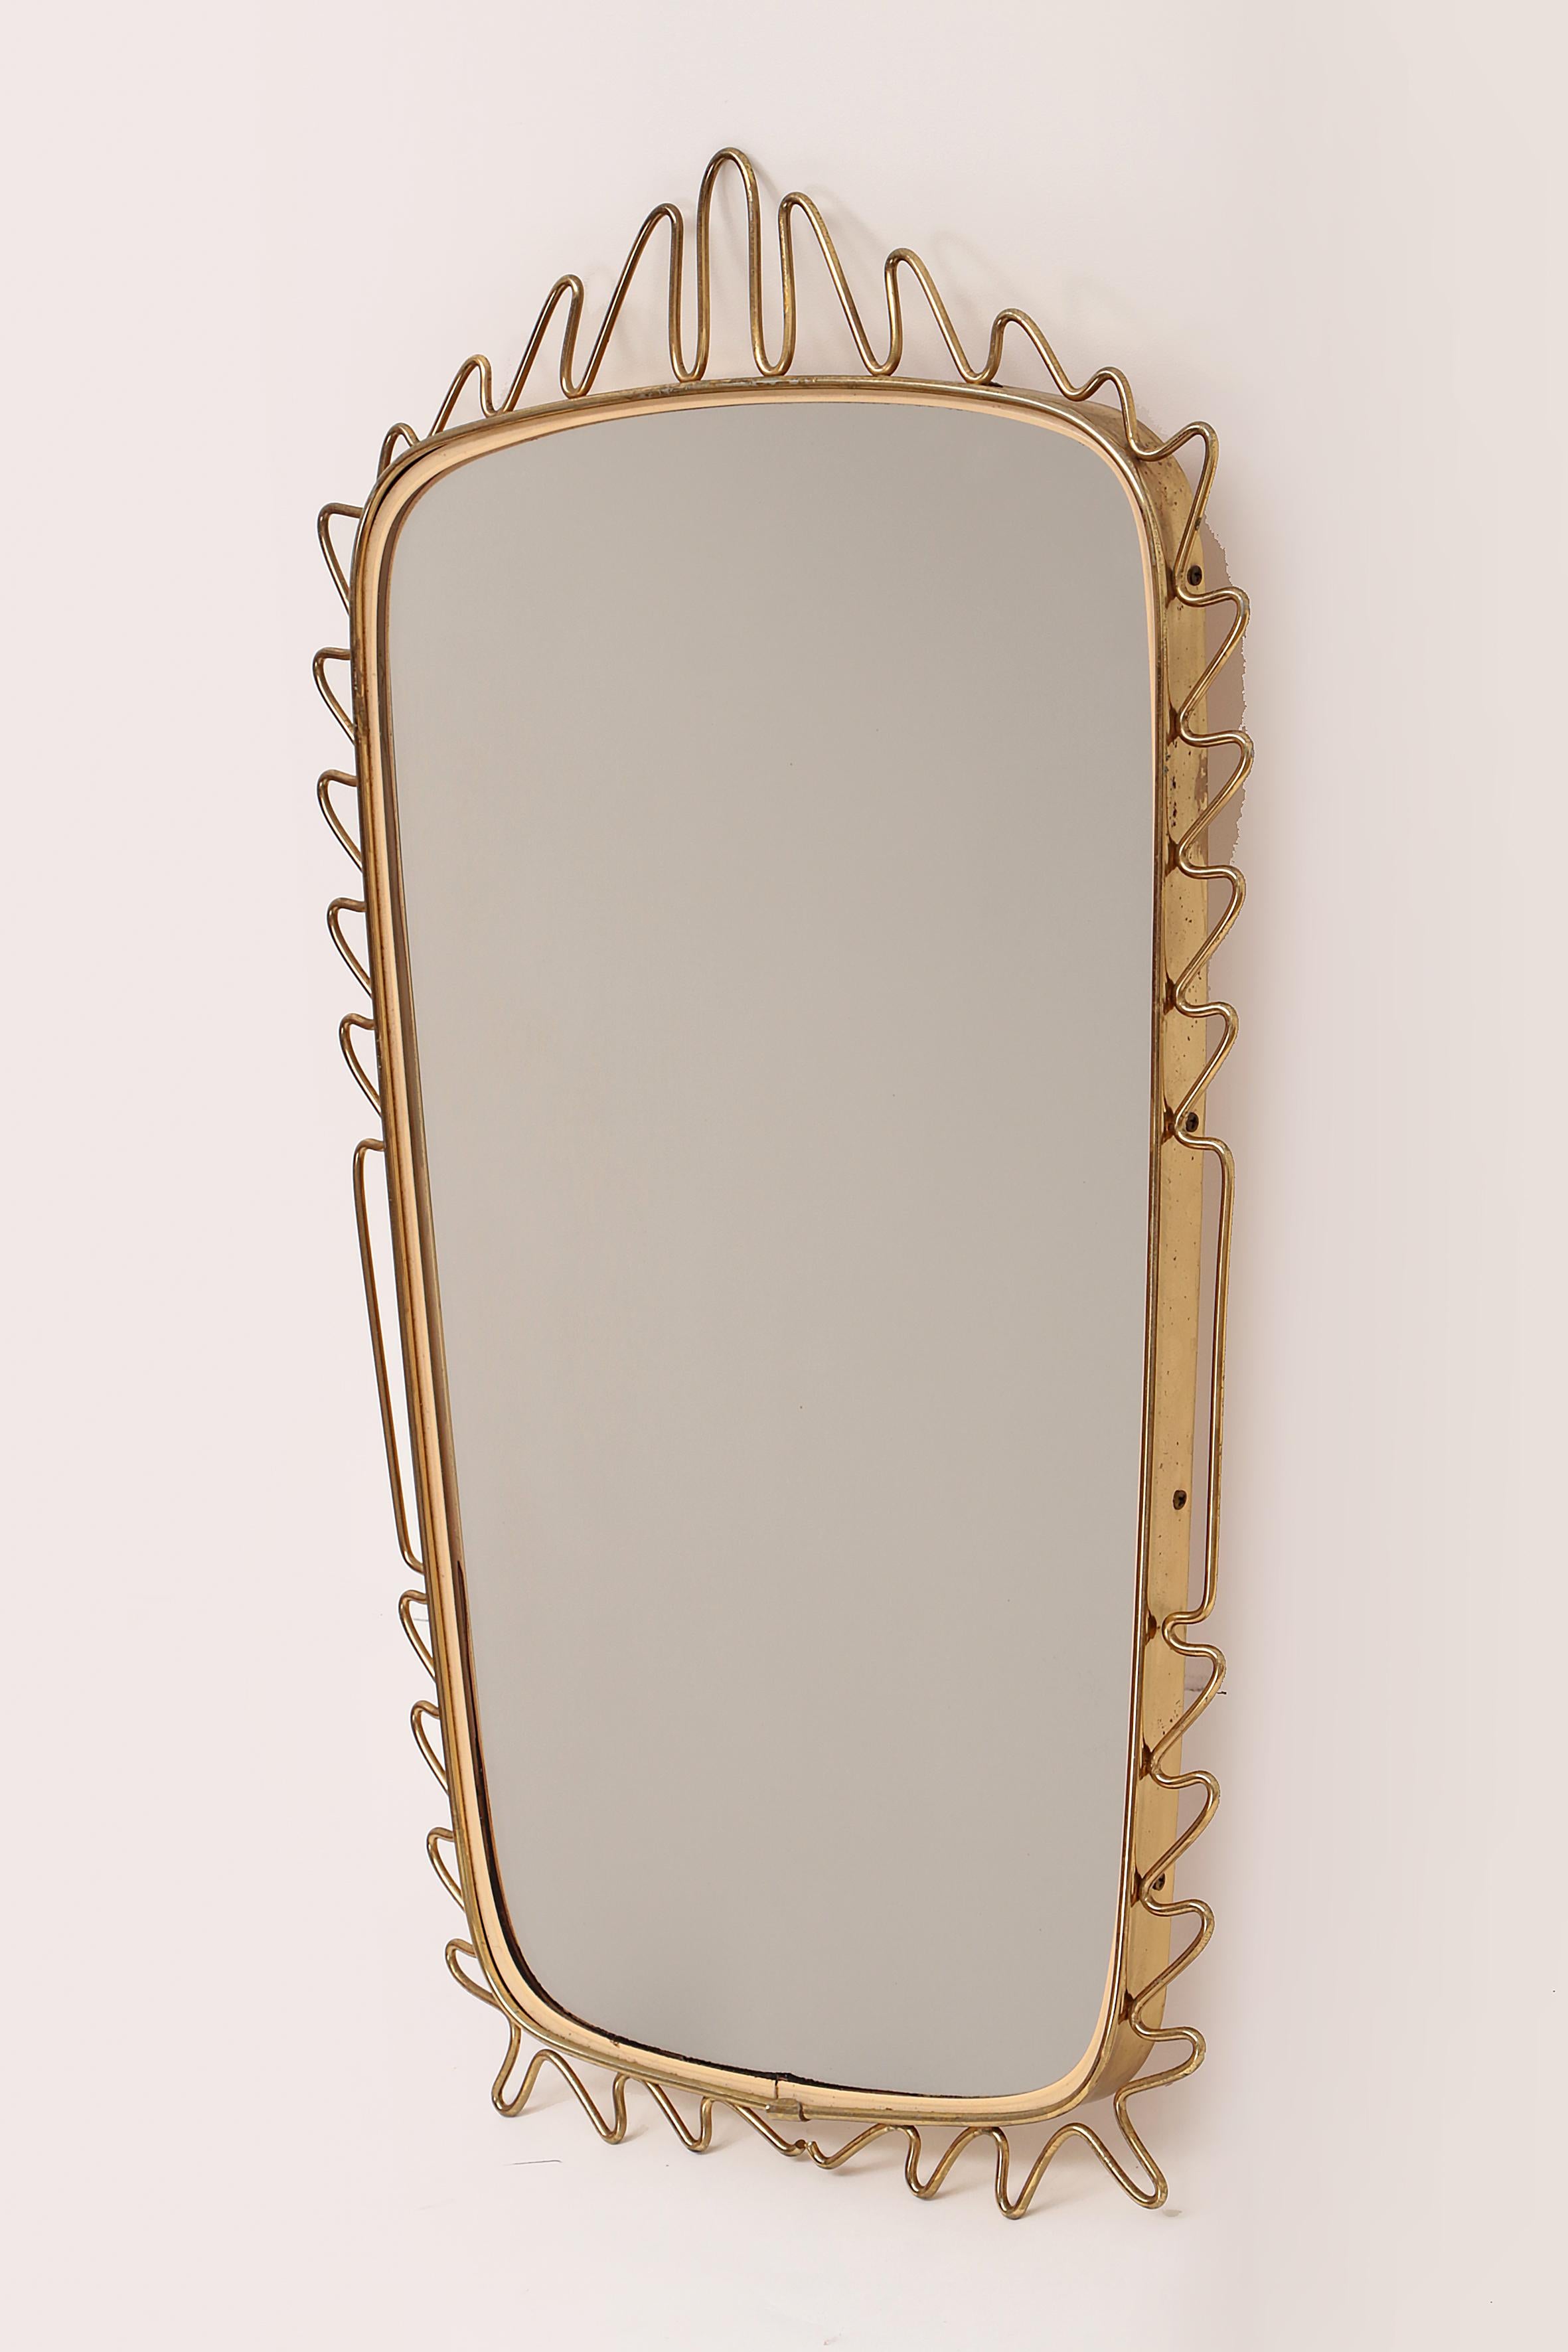 German Vintage Elongated Mirror with Ornate Brass Edge, 1960s